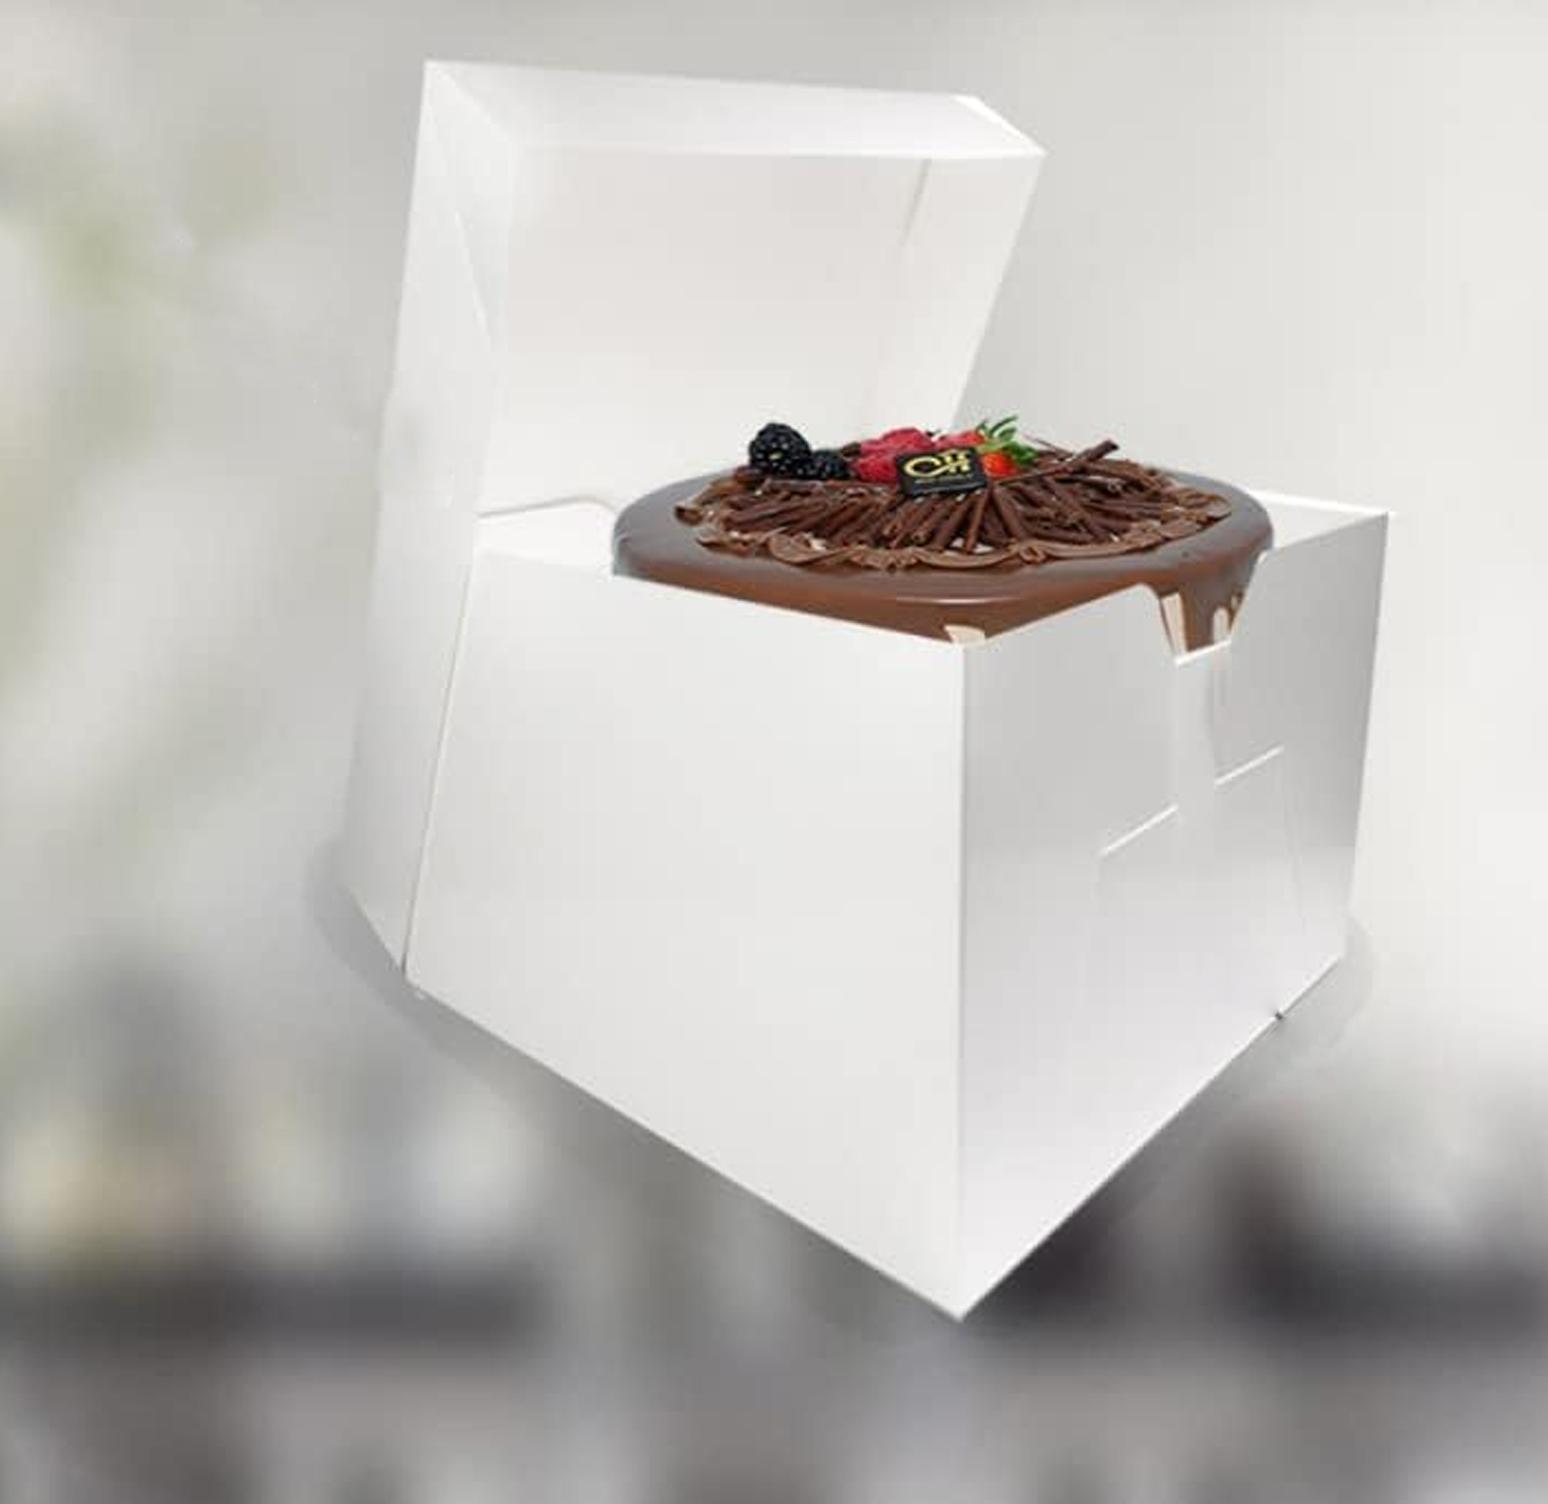 10" X10" X10" TALL WHITE CAKE BOX WITH LID